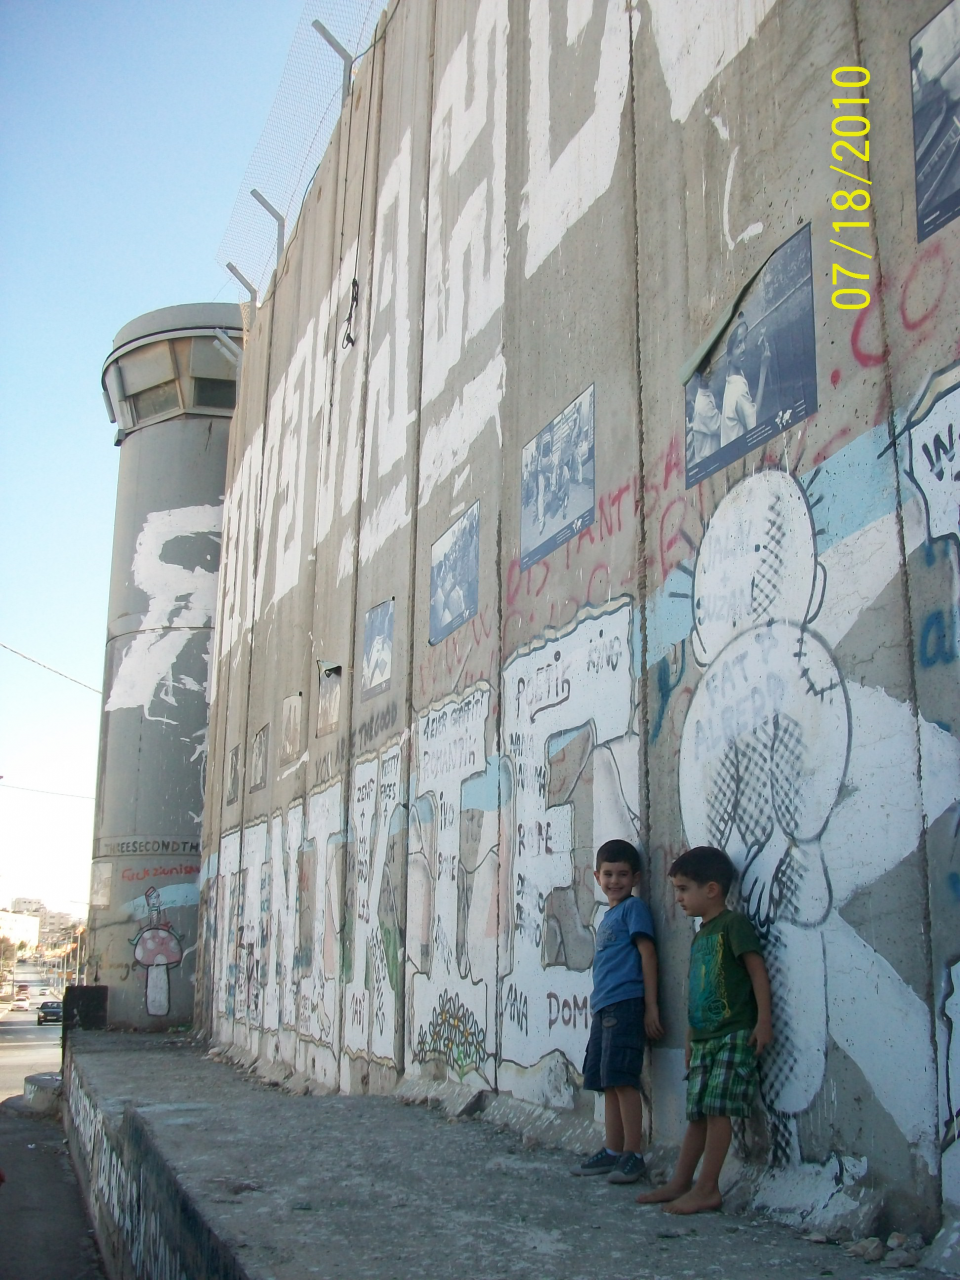 Israeli military watch towers on the Separation Wall / Photo courtesy Sylvia Dahdal